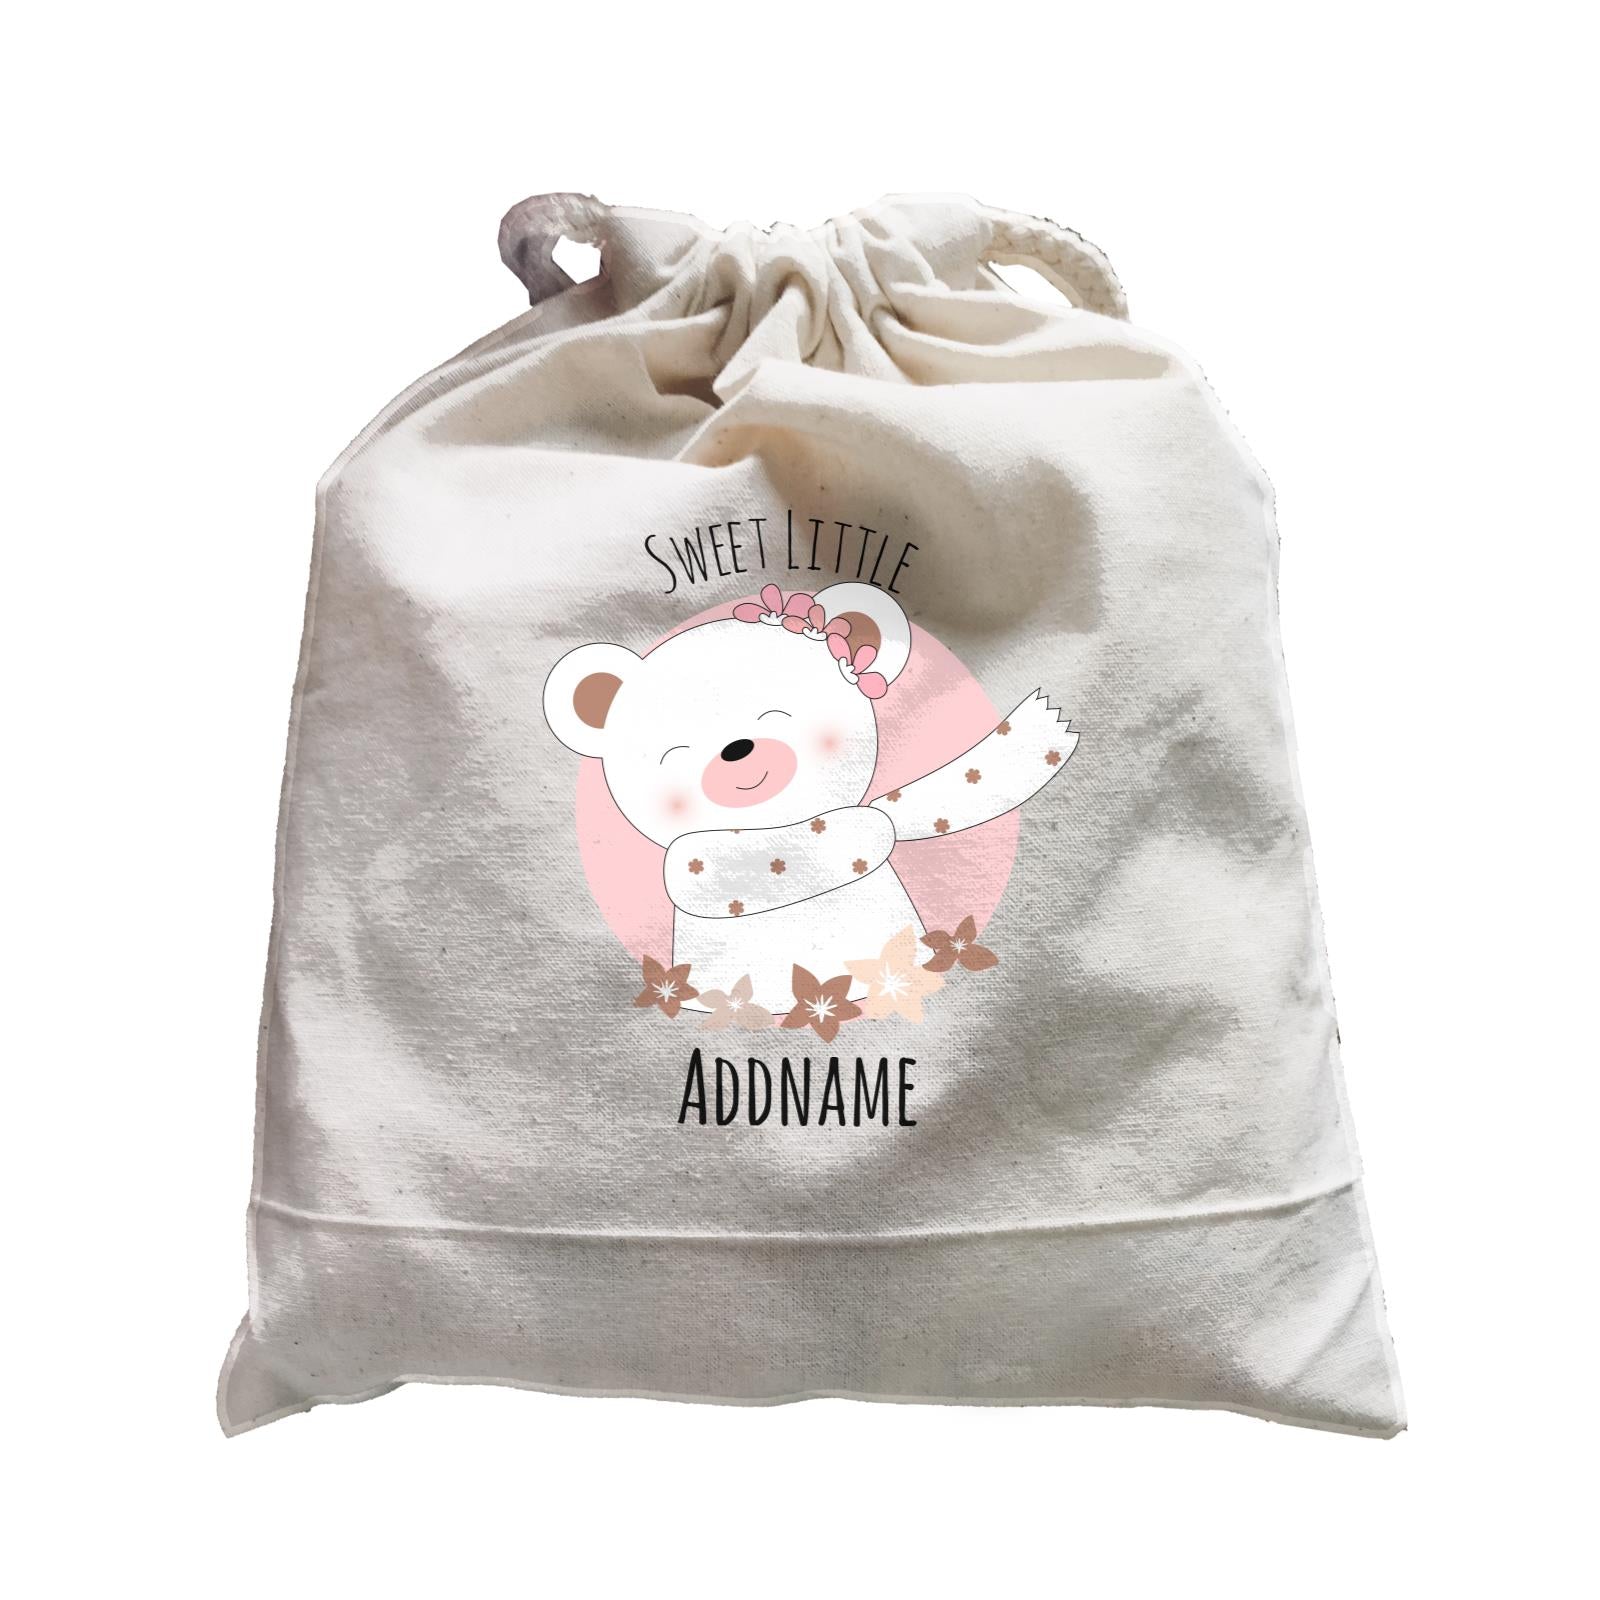 Sweet Animals Sketches Bear Sweet Little Addname Satchel